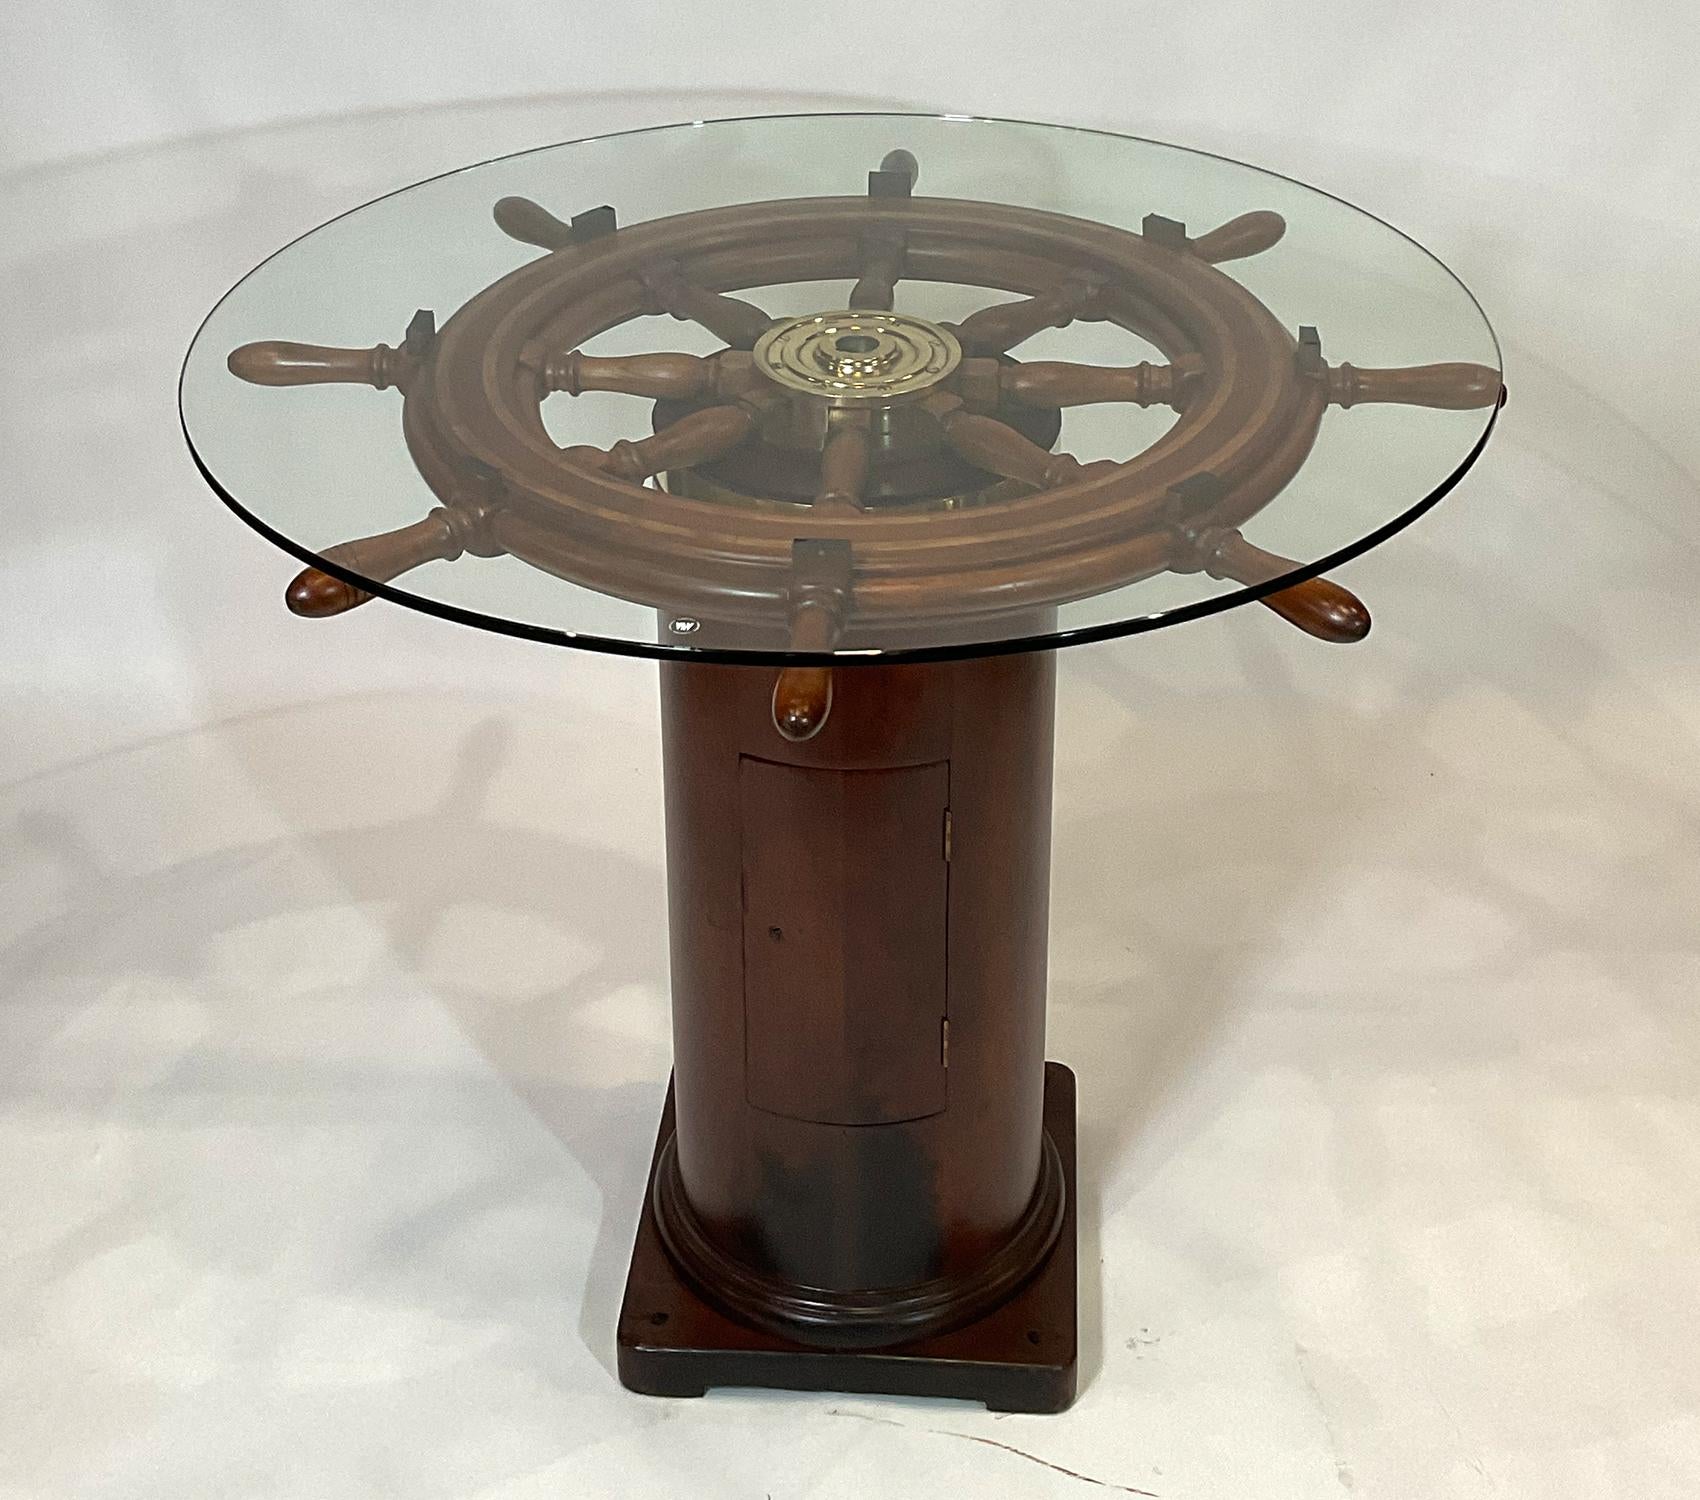 Antique American ships wheel mounted to a ships binnacle base creating an awesome bar height pub table. Perfect for two to four pub stools or chairs. The wheel has been expertly refinished. The brass hub has been highly polished and lacquered. This